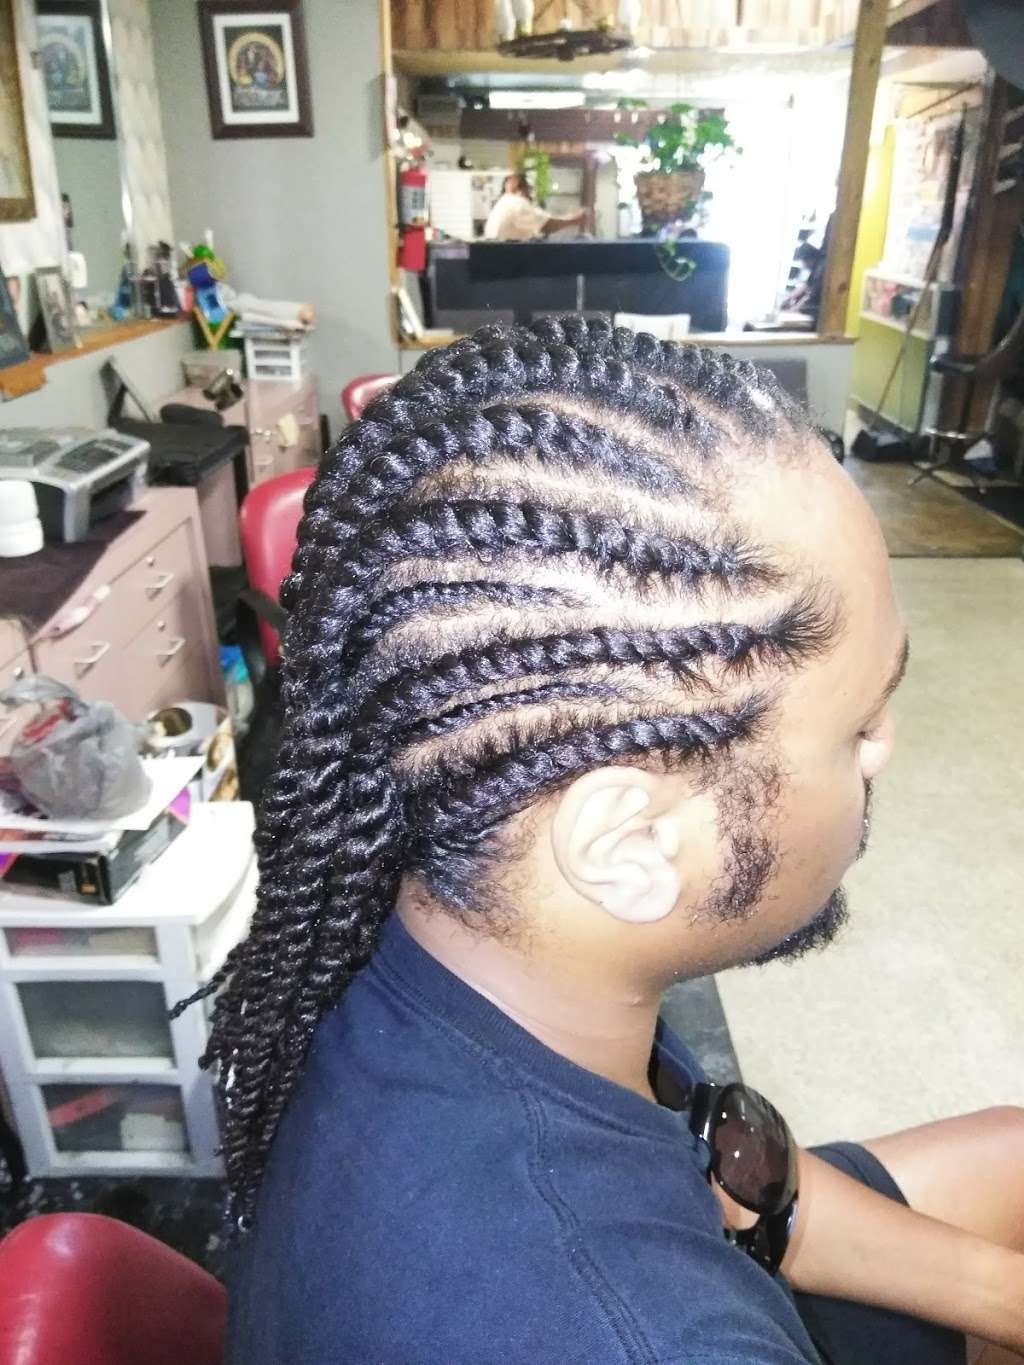 Seawards Unisex Salon & Barber Shop | 5930 Martin Luther King Jr Hwy, Seat Pleasant, MD 20743, United States | Phone: (301) 883-9280